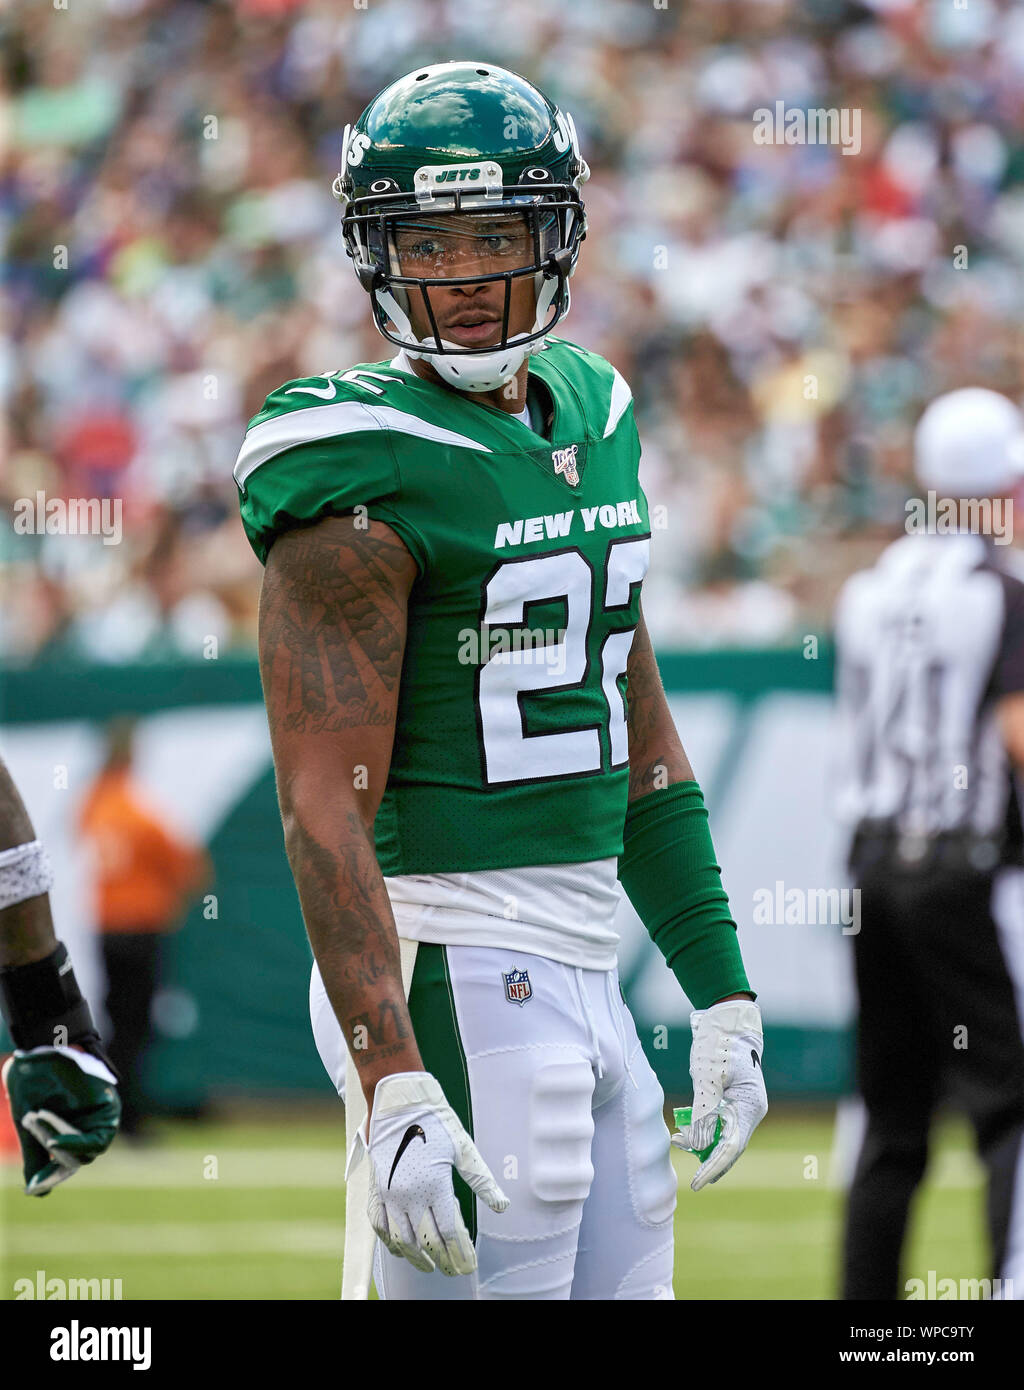 East Rutherford, New Jersey, USA. 8th Sep, 2019. New York Jets ...